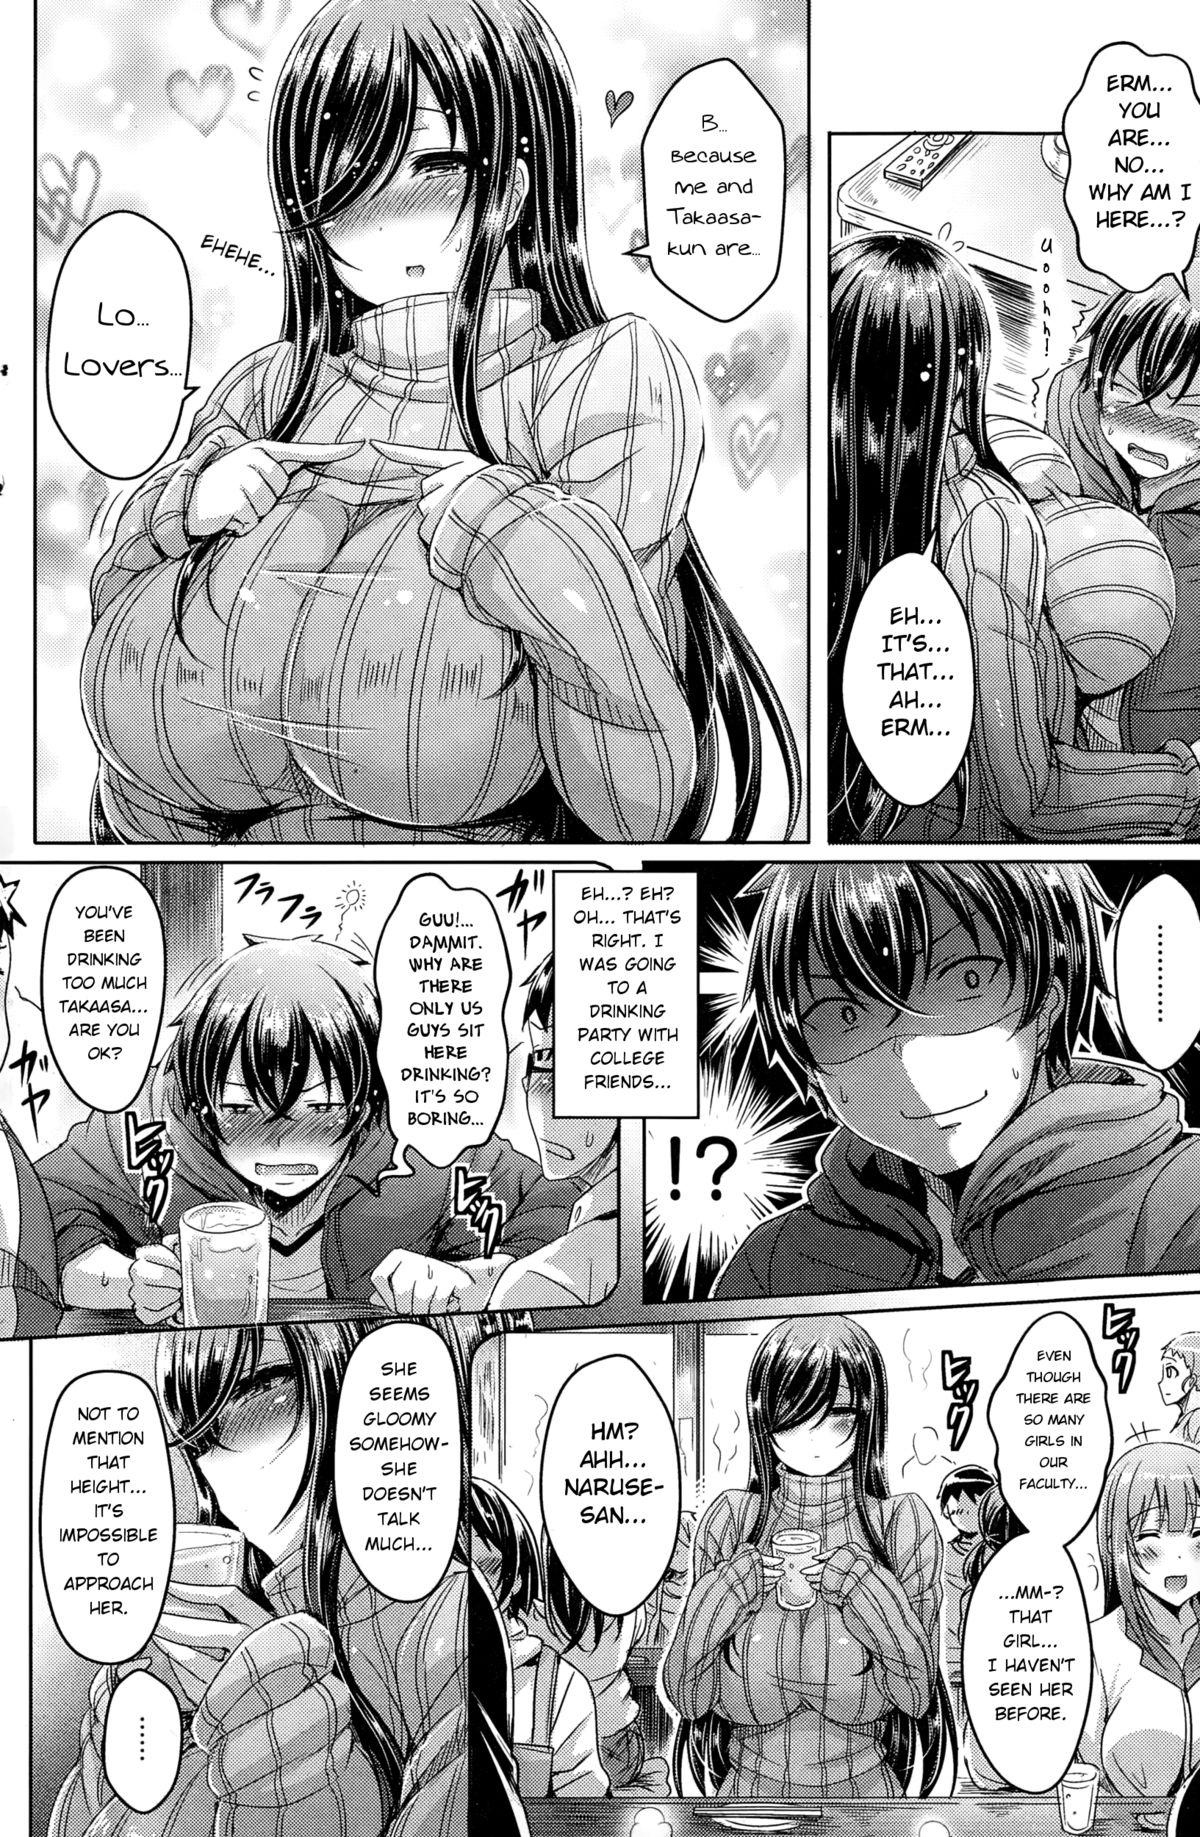 Whipping Dekoboko LOVERS Best Blowjobs - Page 2